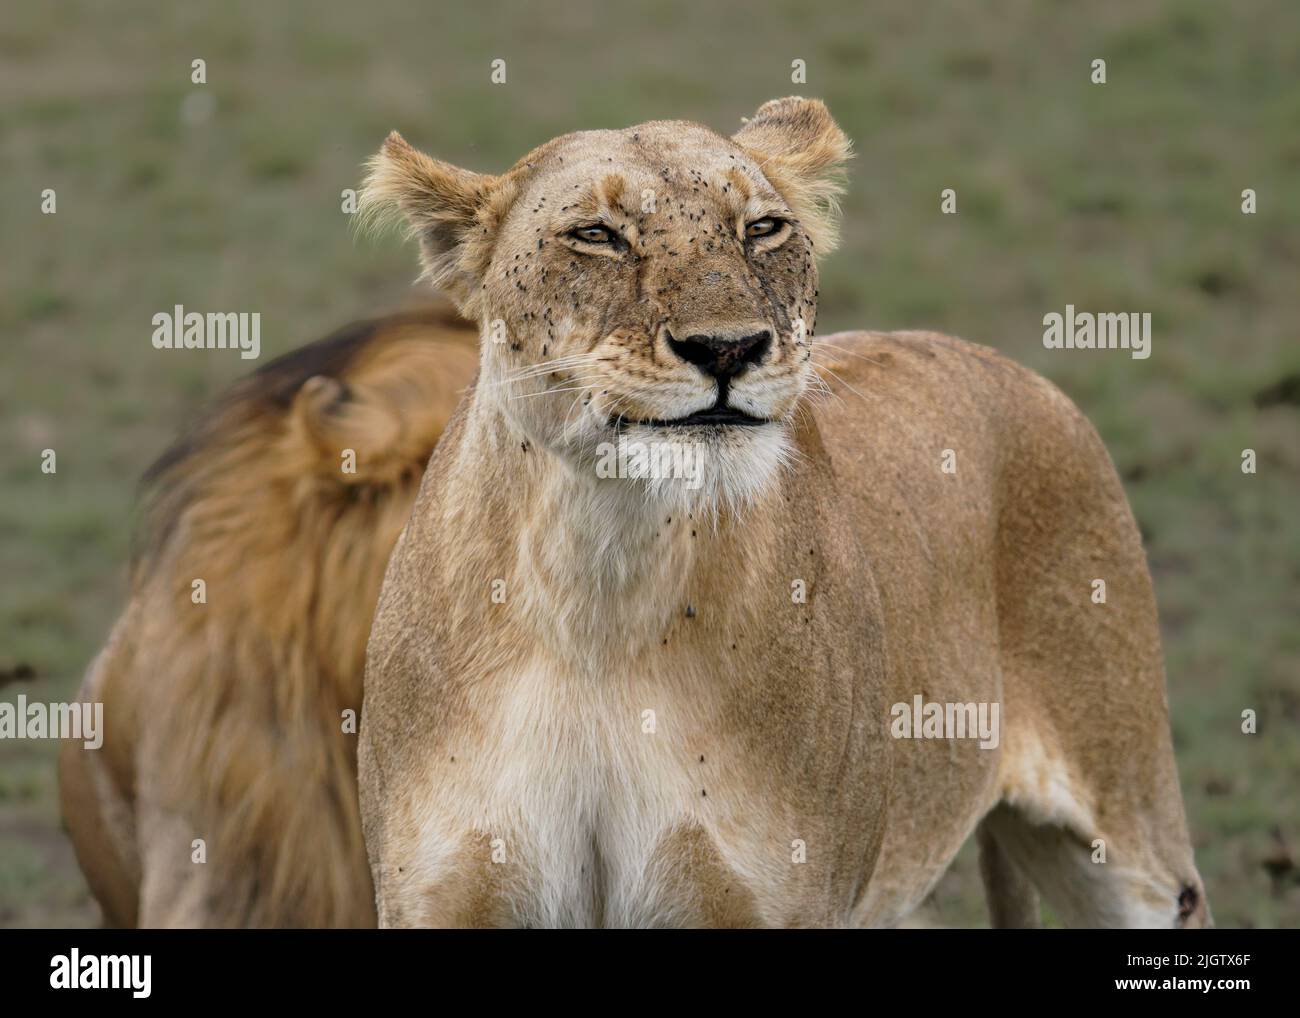 The lioness pulls expressive faces as she poses for the camera. Maasai Mara, Kenya: THIS LIONESS was caught smiling at the camera and pulling funny fa Stock Photo